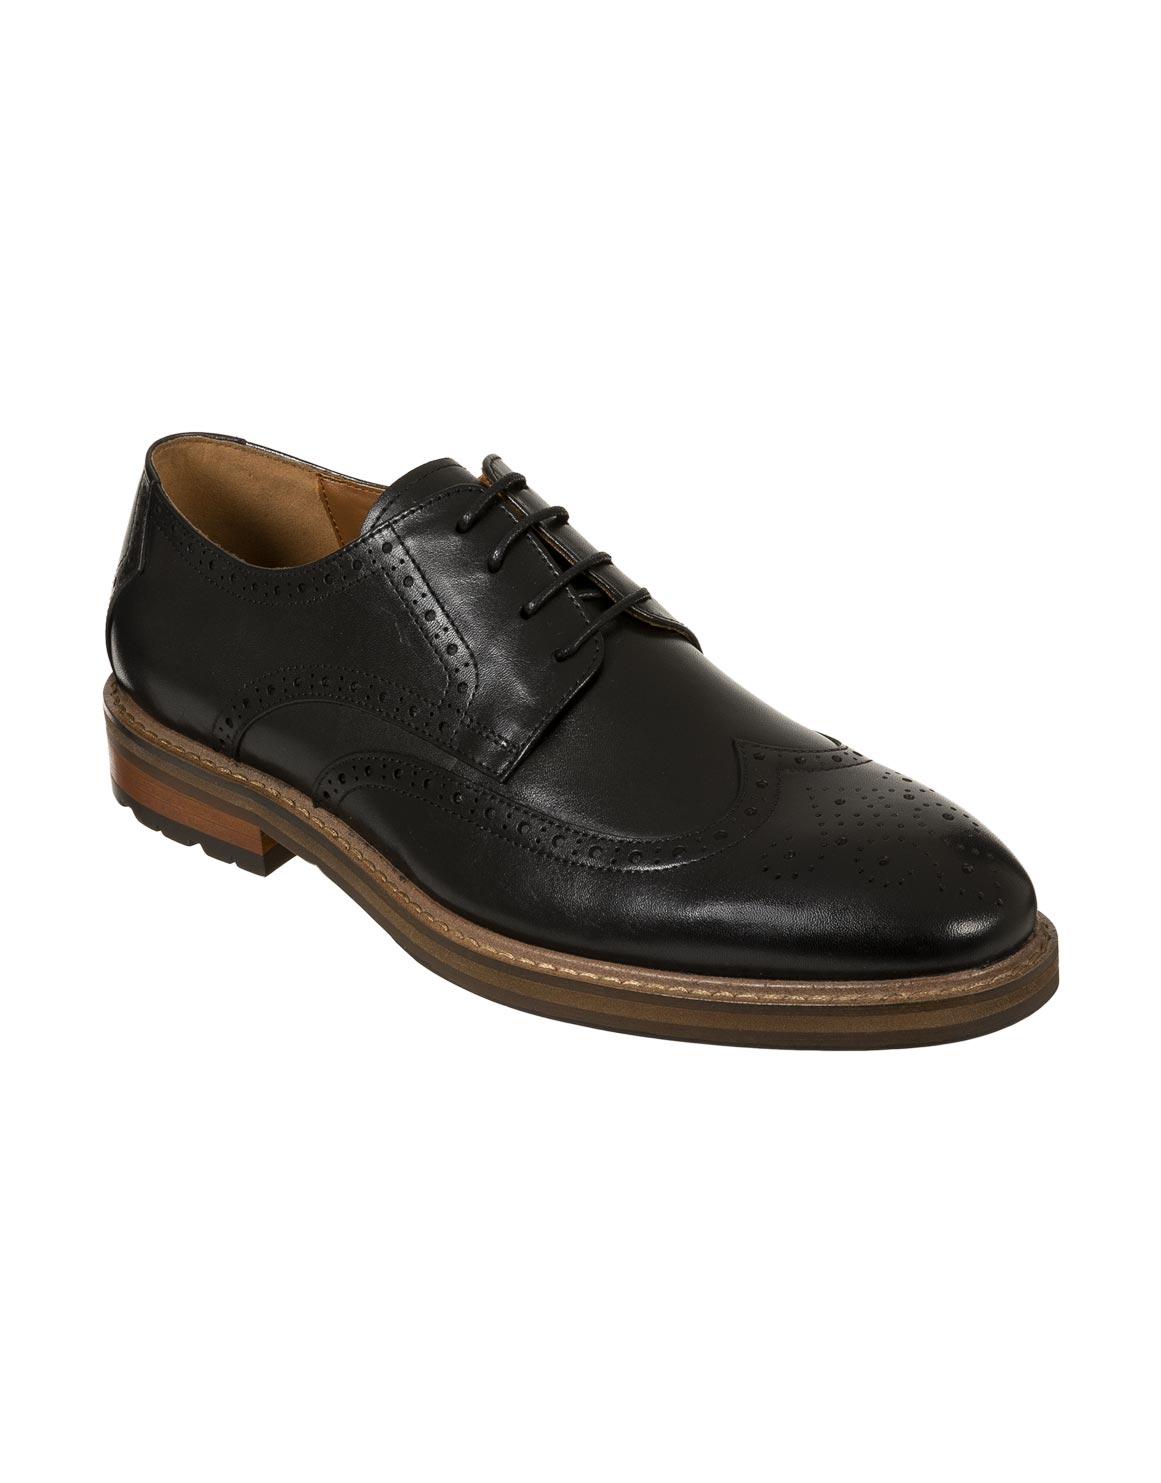 woolworths mens casual shoes, OFF 72%,Buy!